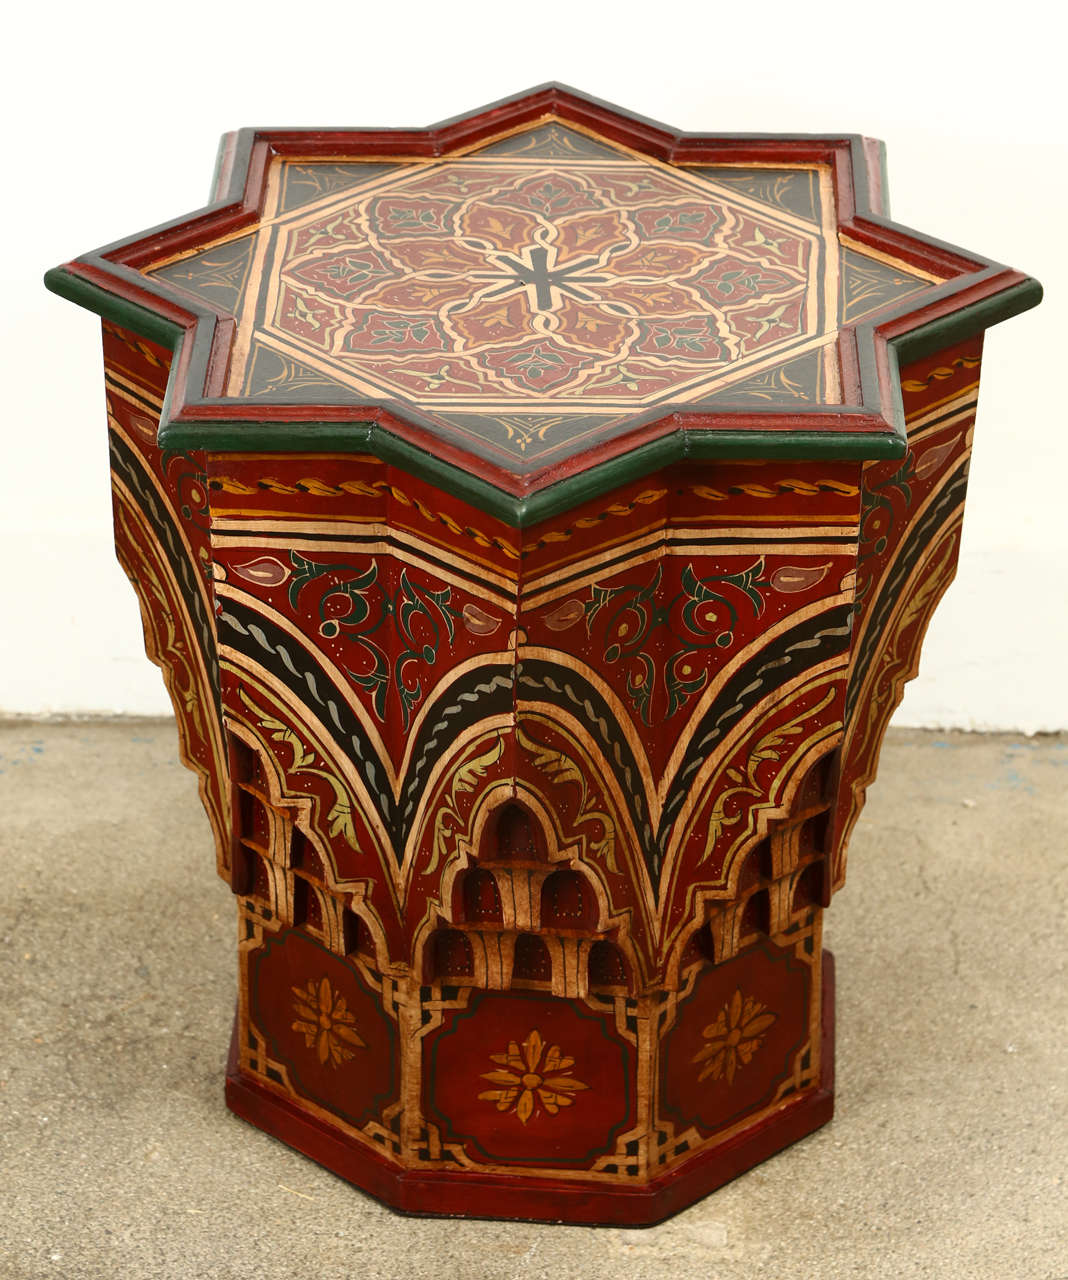 Moroccan colorful hand-painted and carved side occasional table with Moorish designs.
Hispano Moresque style in maroon background color with multicolored floral and geometric designs. 
Very decorative fine artwork on a star shape base.
You can